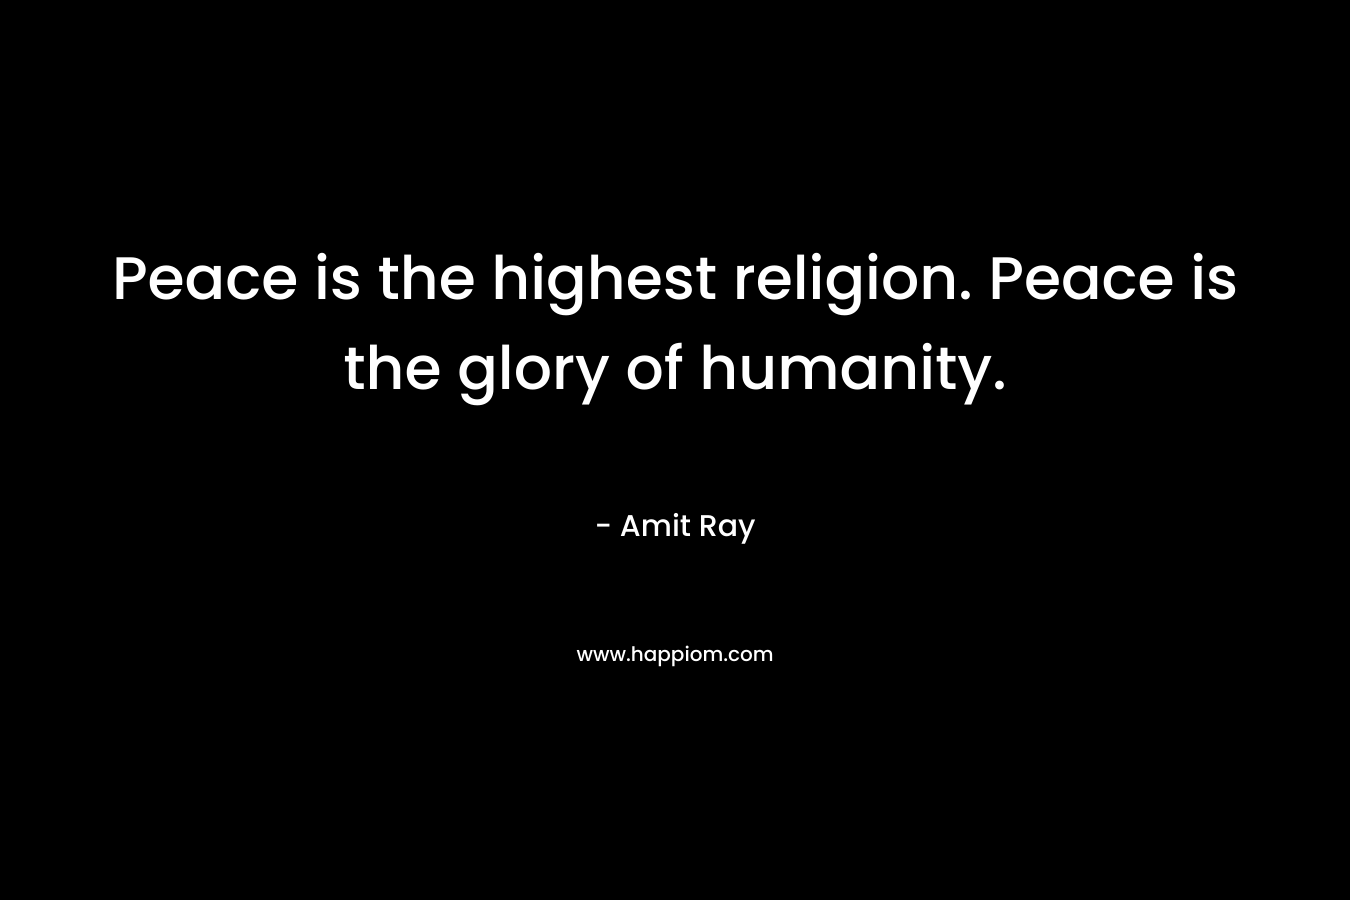 Peace is the highest religion. Peace is the glory of humanity.